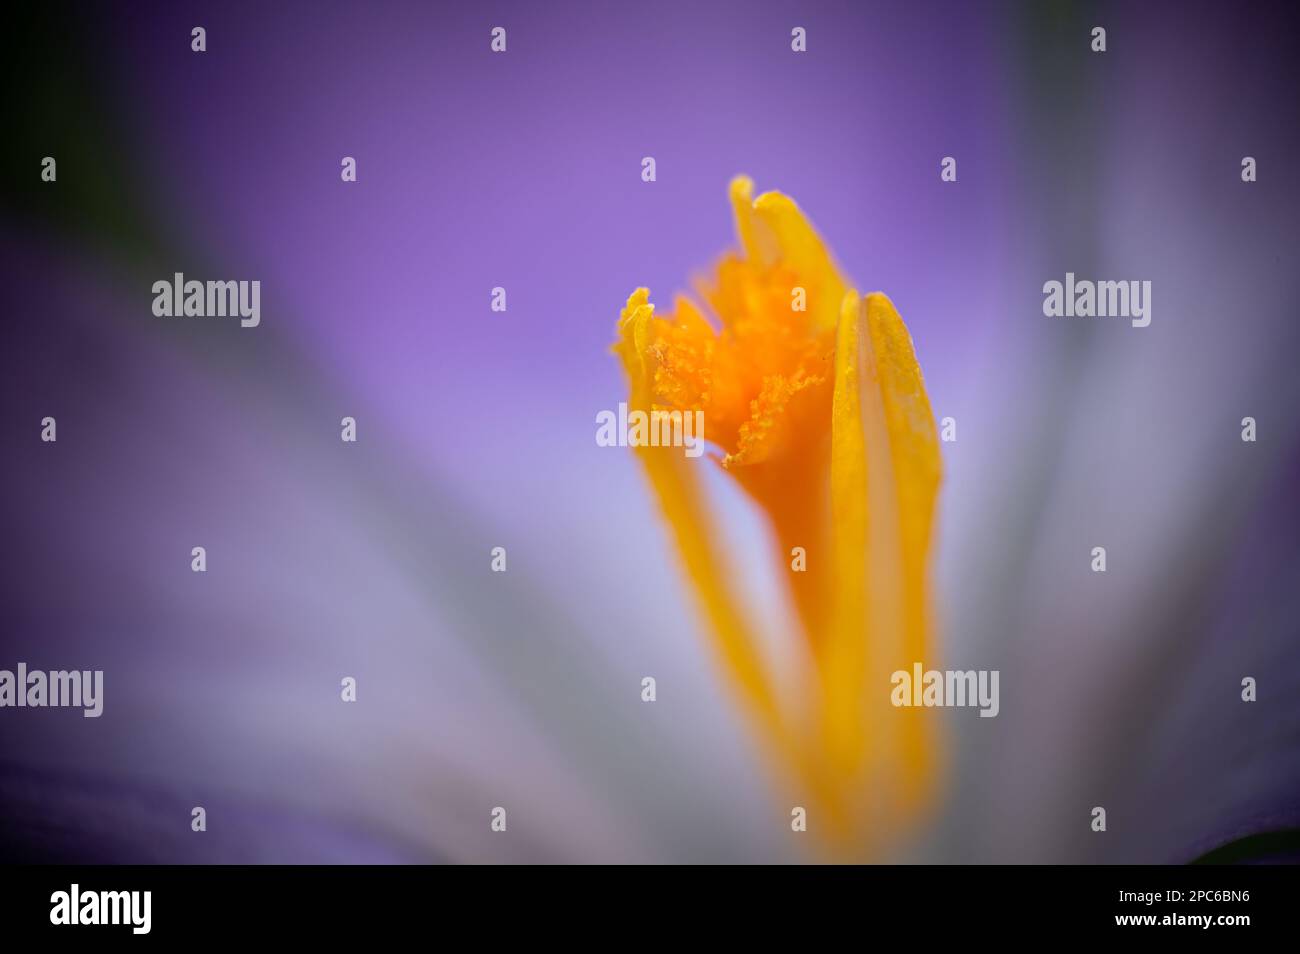 Extreme macro photograph. Extreme close up to crocuses (croci). Shallow depth of field, soft focus, abstract. Purple, Yellow and orange tones. Stock Photo